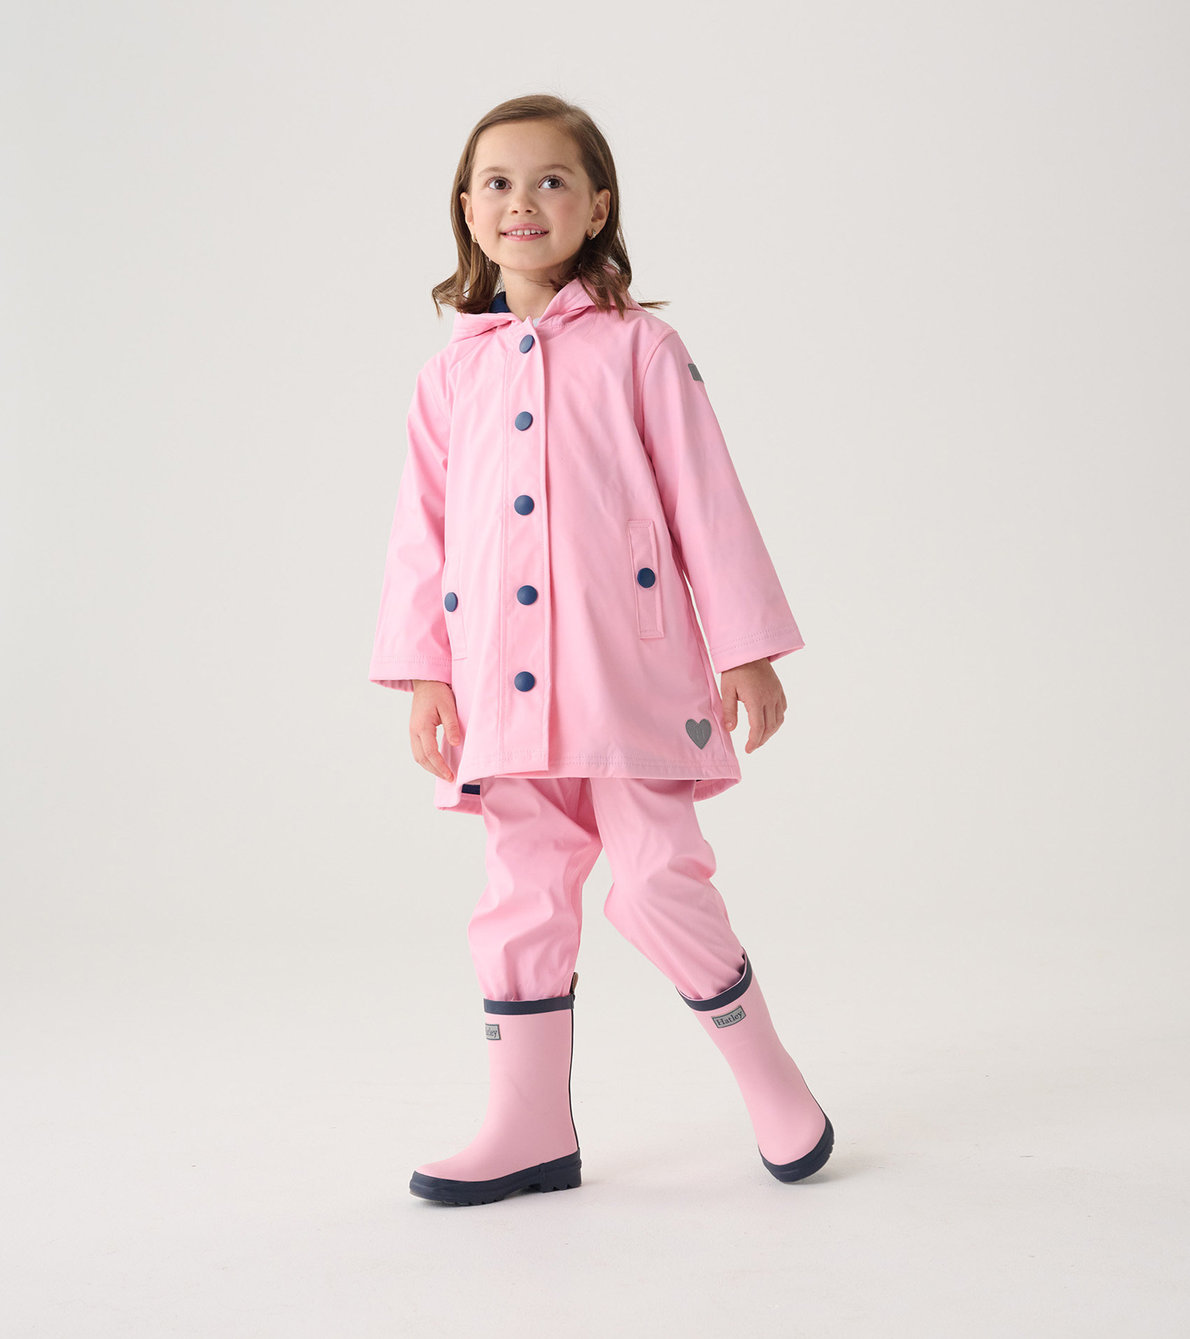 View larger image of Classic Pink with Navy Stripe Lining Splash Jacket